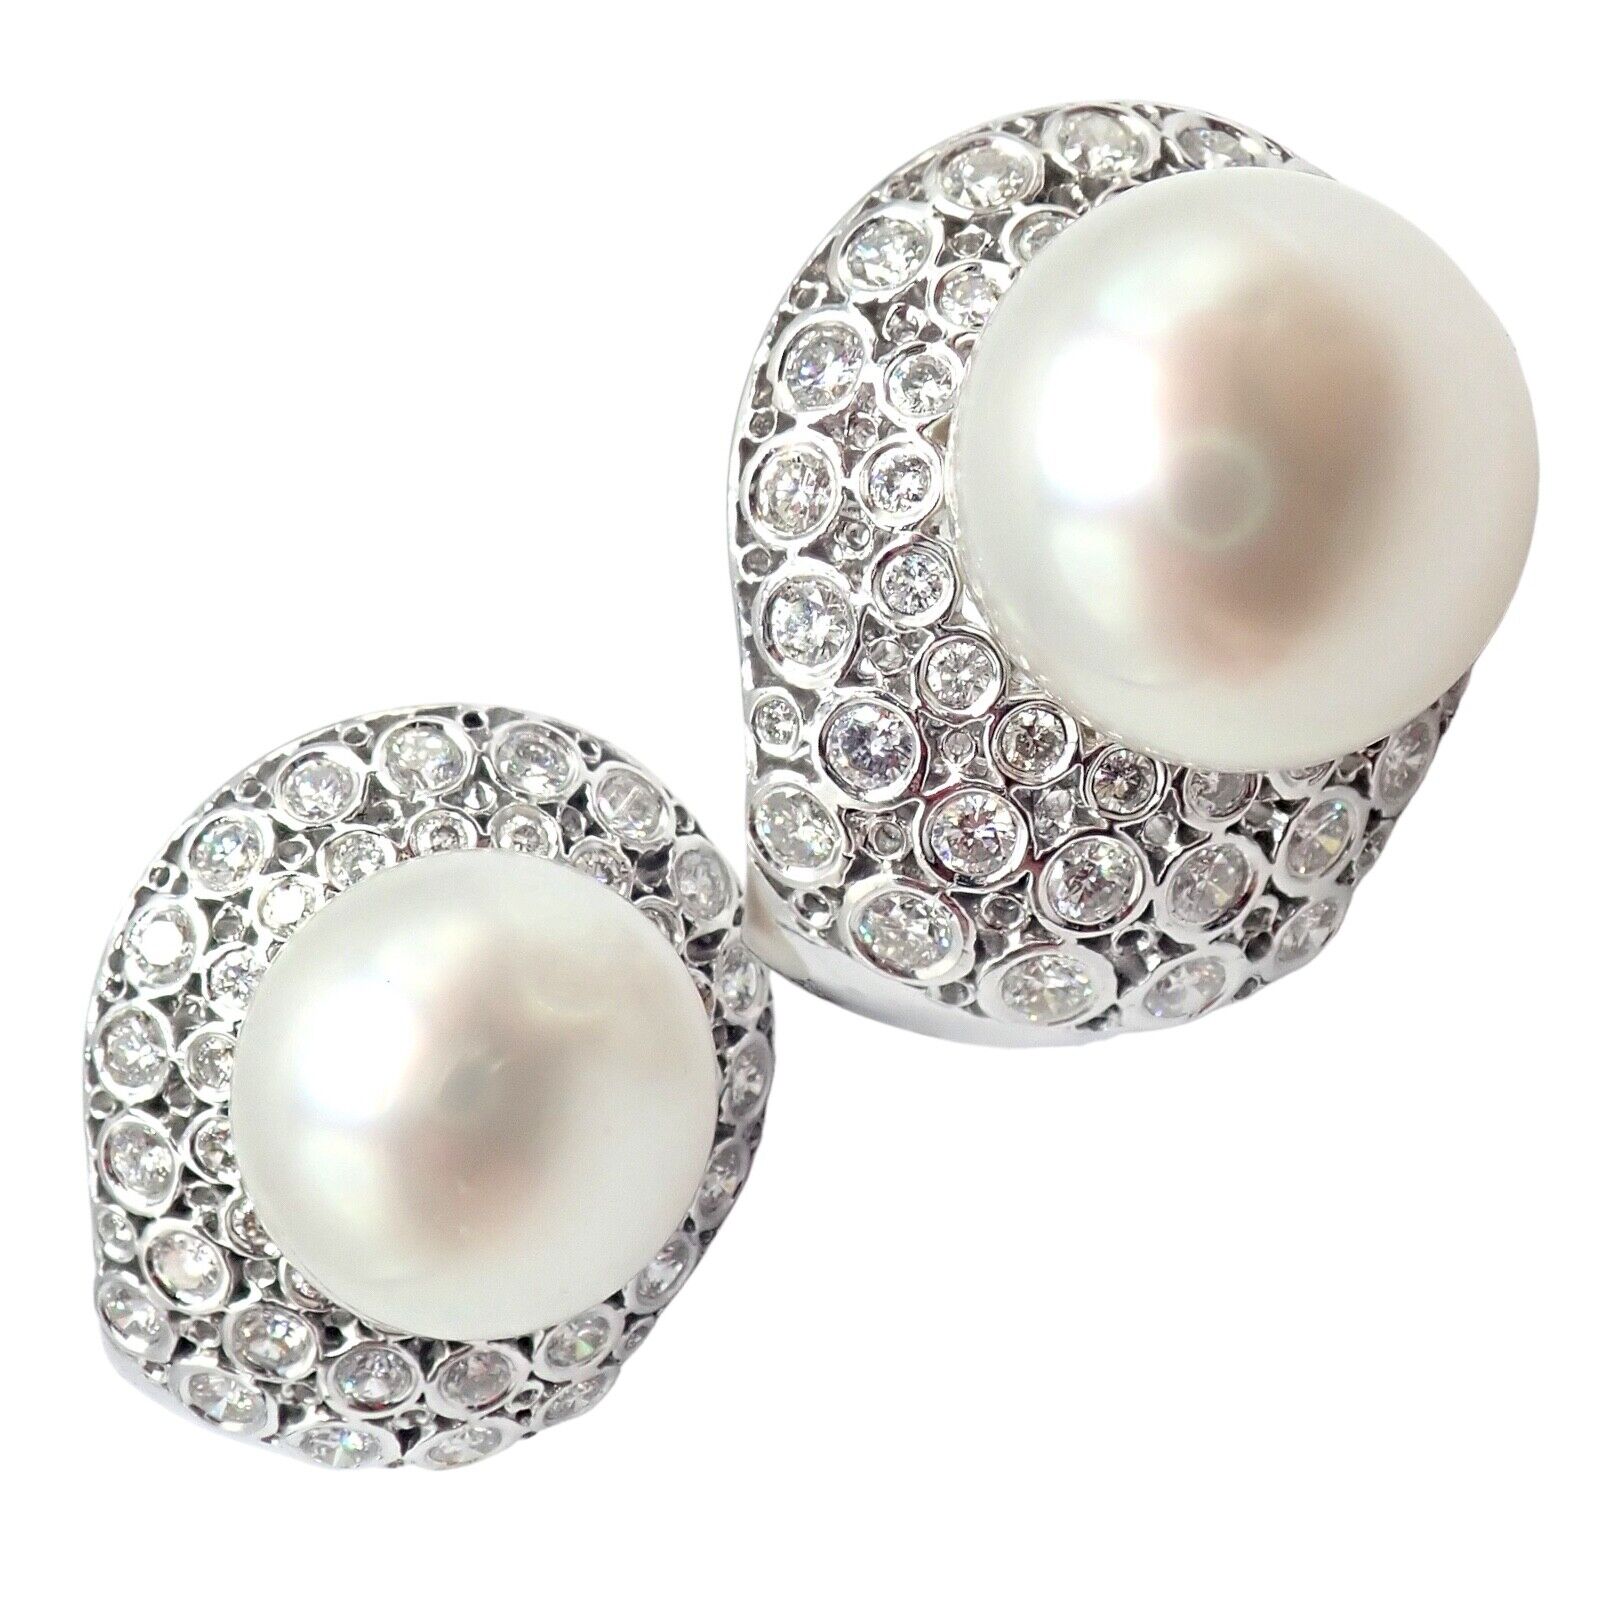 Estate Jewelry & Watches:Vintage & Antique Jewelry:Earrings Vintage Estate 18k White Gold Diamond 13mm Pearl Earrings